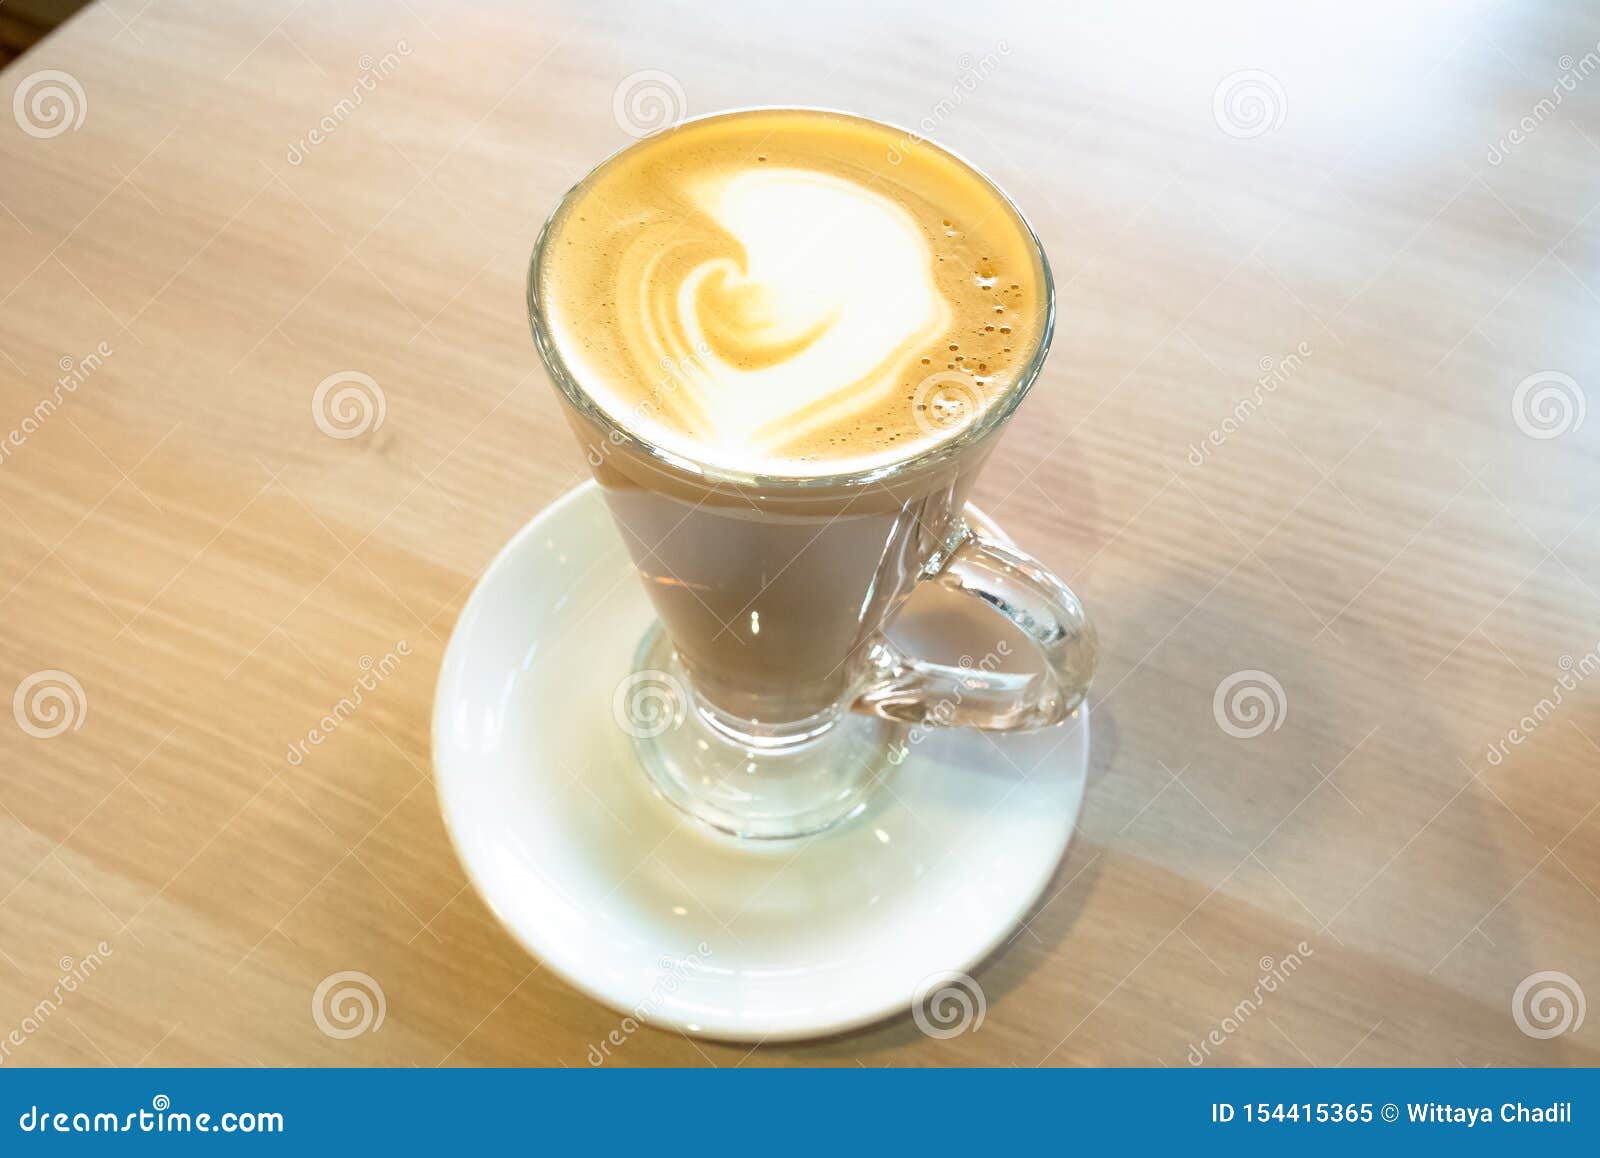 Cafe Coffee Latte Plate Coffee Stock Image Image Of Cappuccino Background 154415365